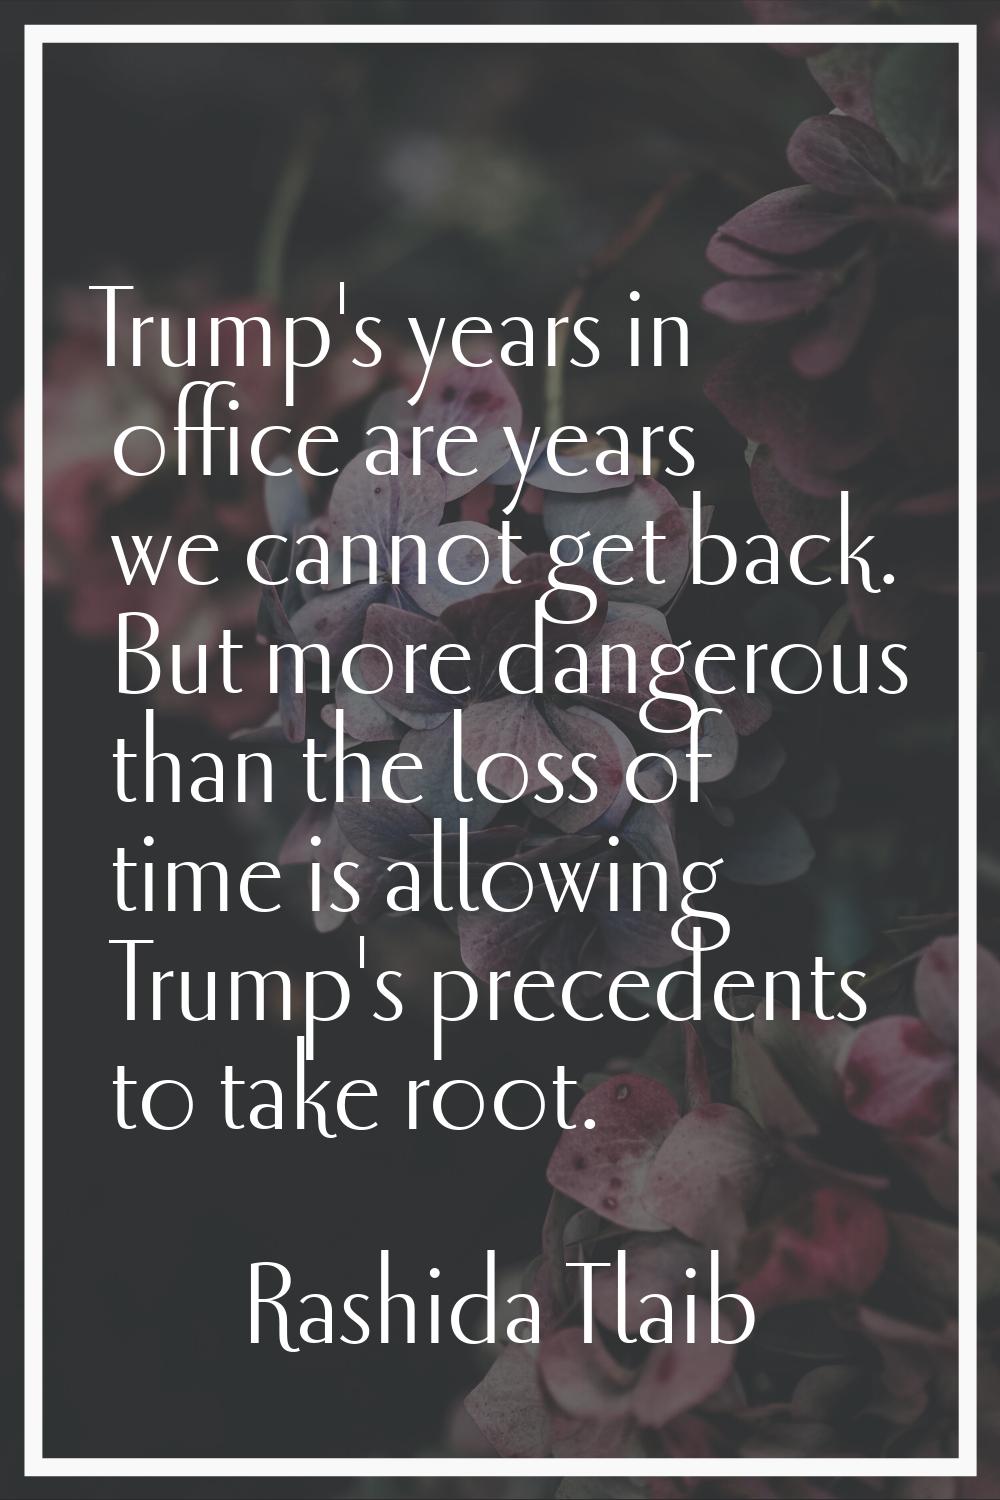 Trump's years in office are years we cannot get back. But more dangerous than the loss of time is a